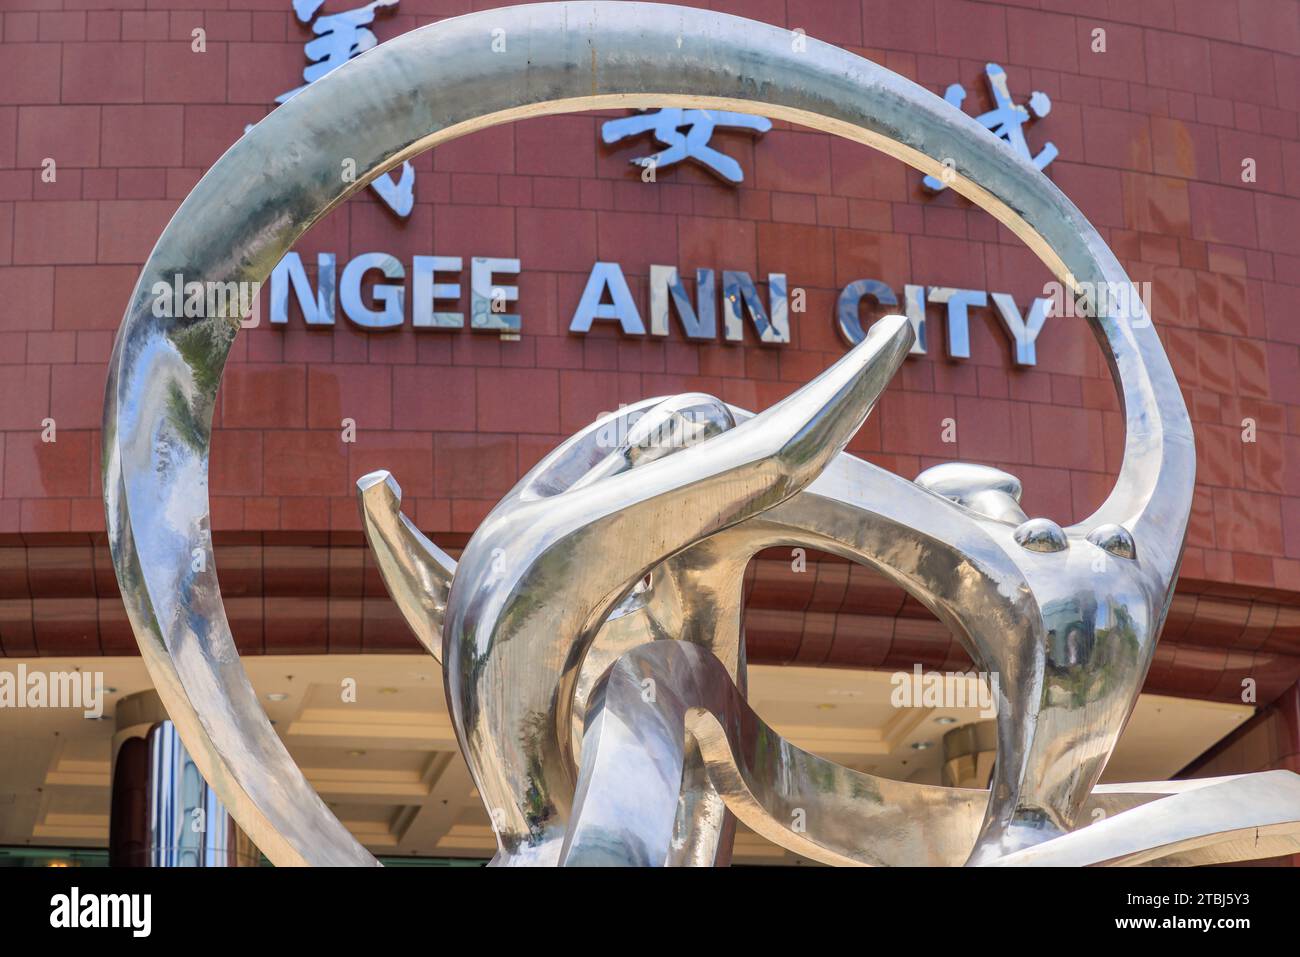 Ngee Ann City, Orchard Road, Singapore Foto Stock